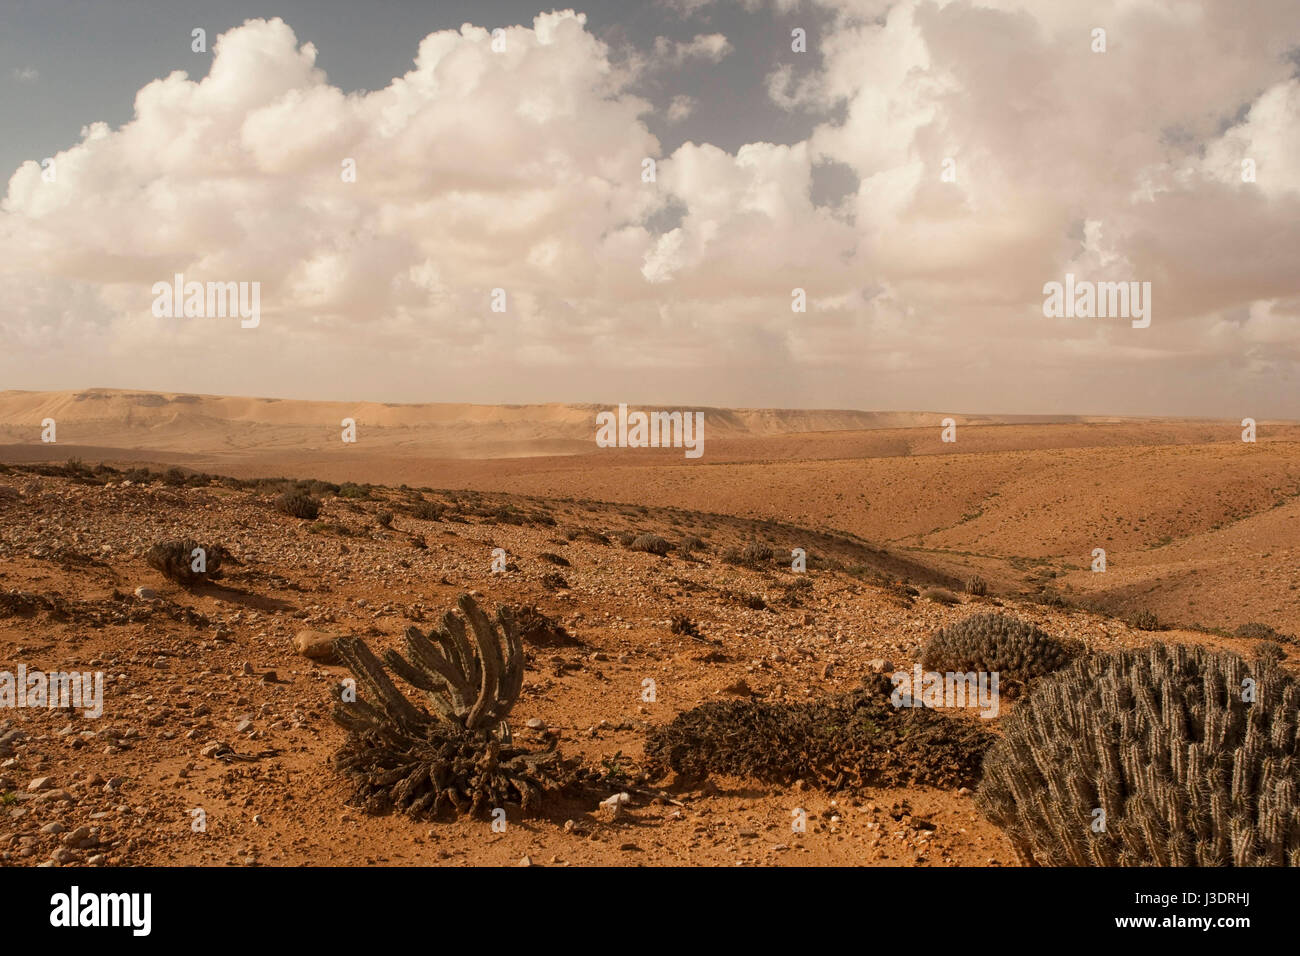 The width and drought of the landscape during a road trip through Western Sahara Stock Photo